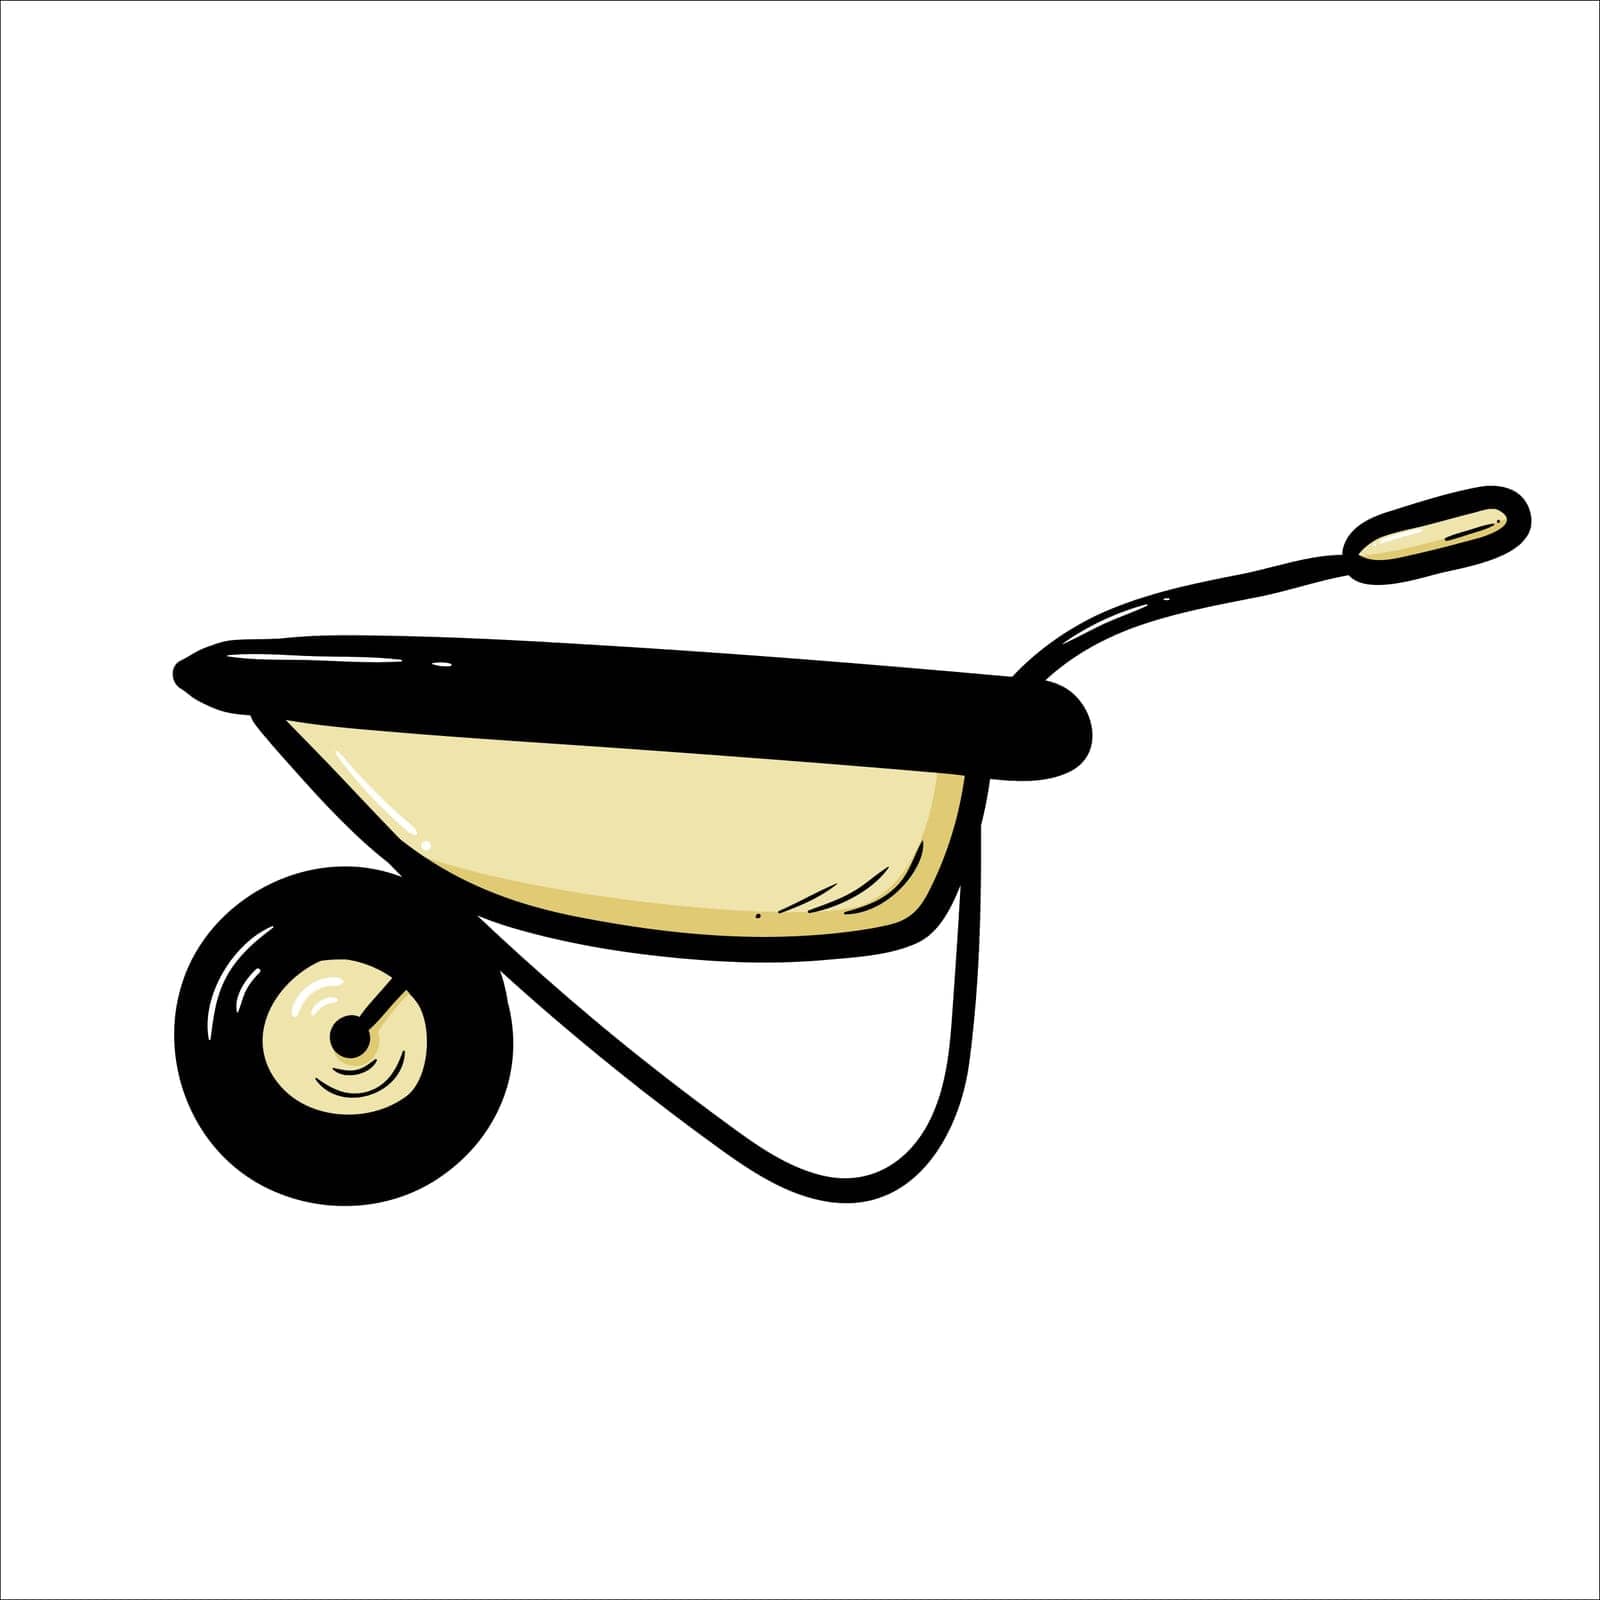 Hand drawn garden wheelbarrow. Doodle sketch style vector illustration. Drawing line simple wheelbarrow icon isolated on white background.